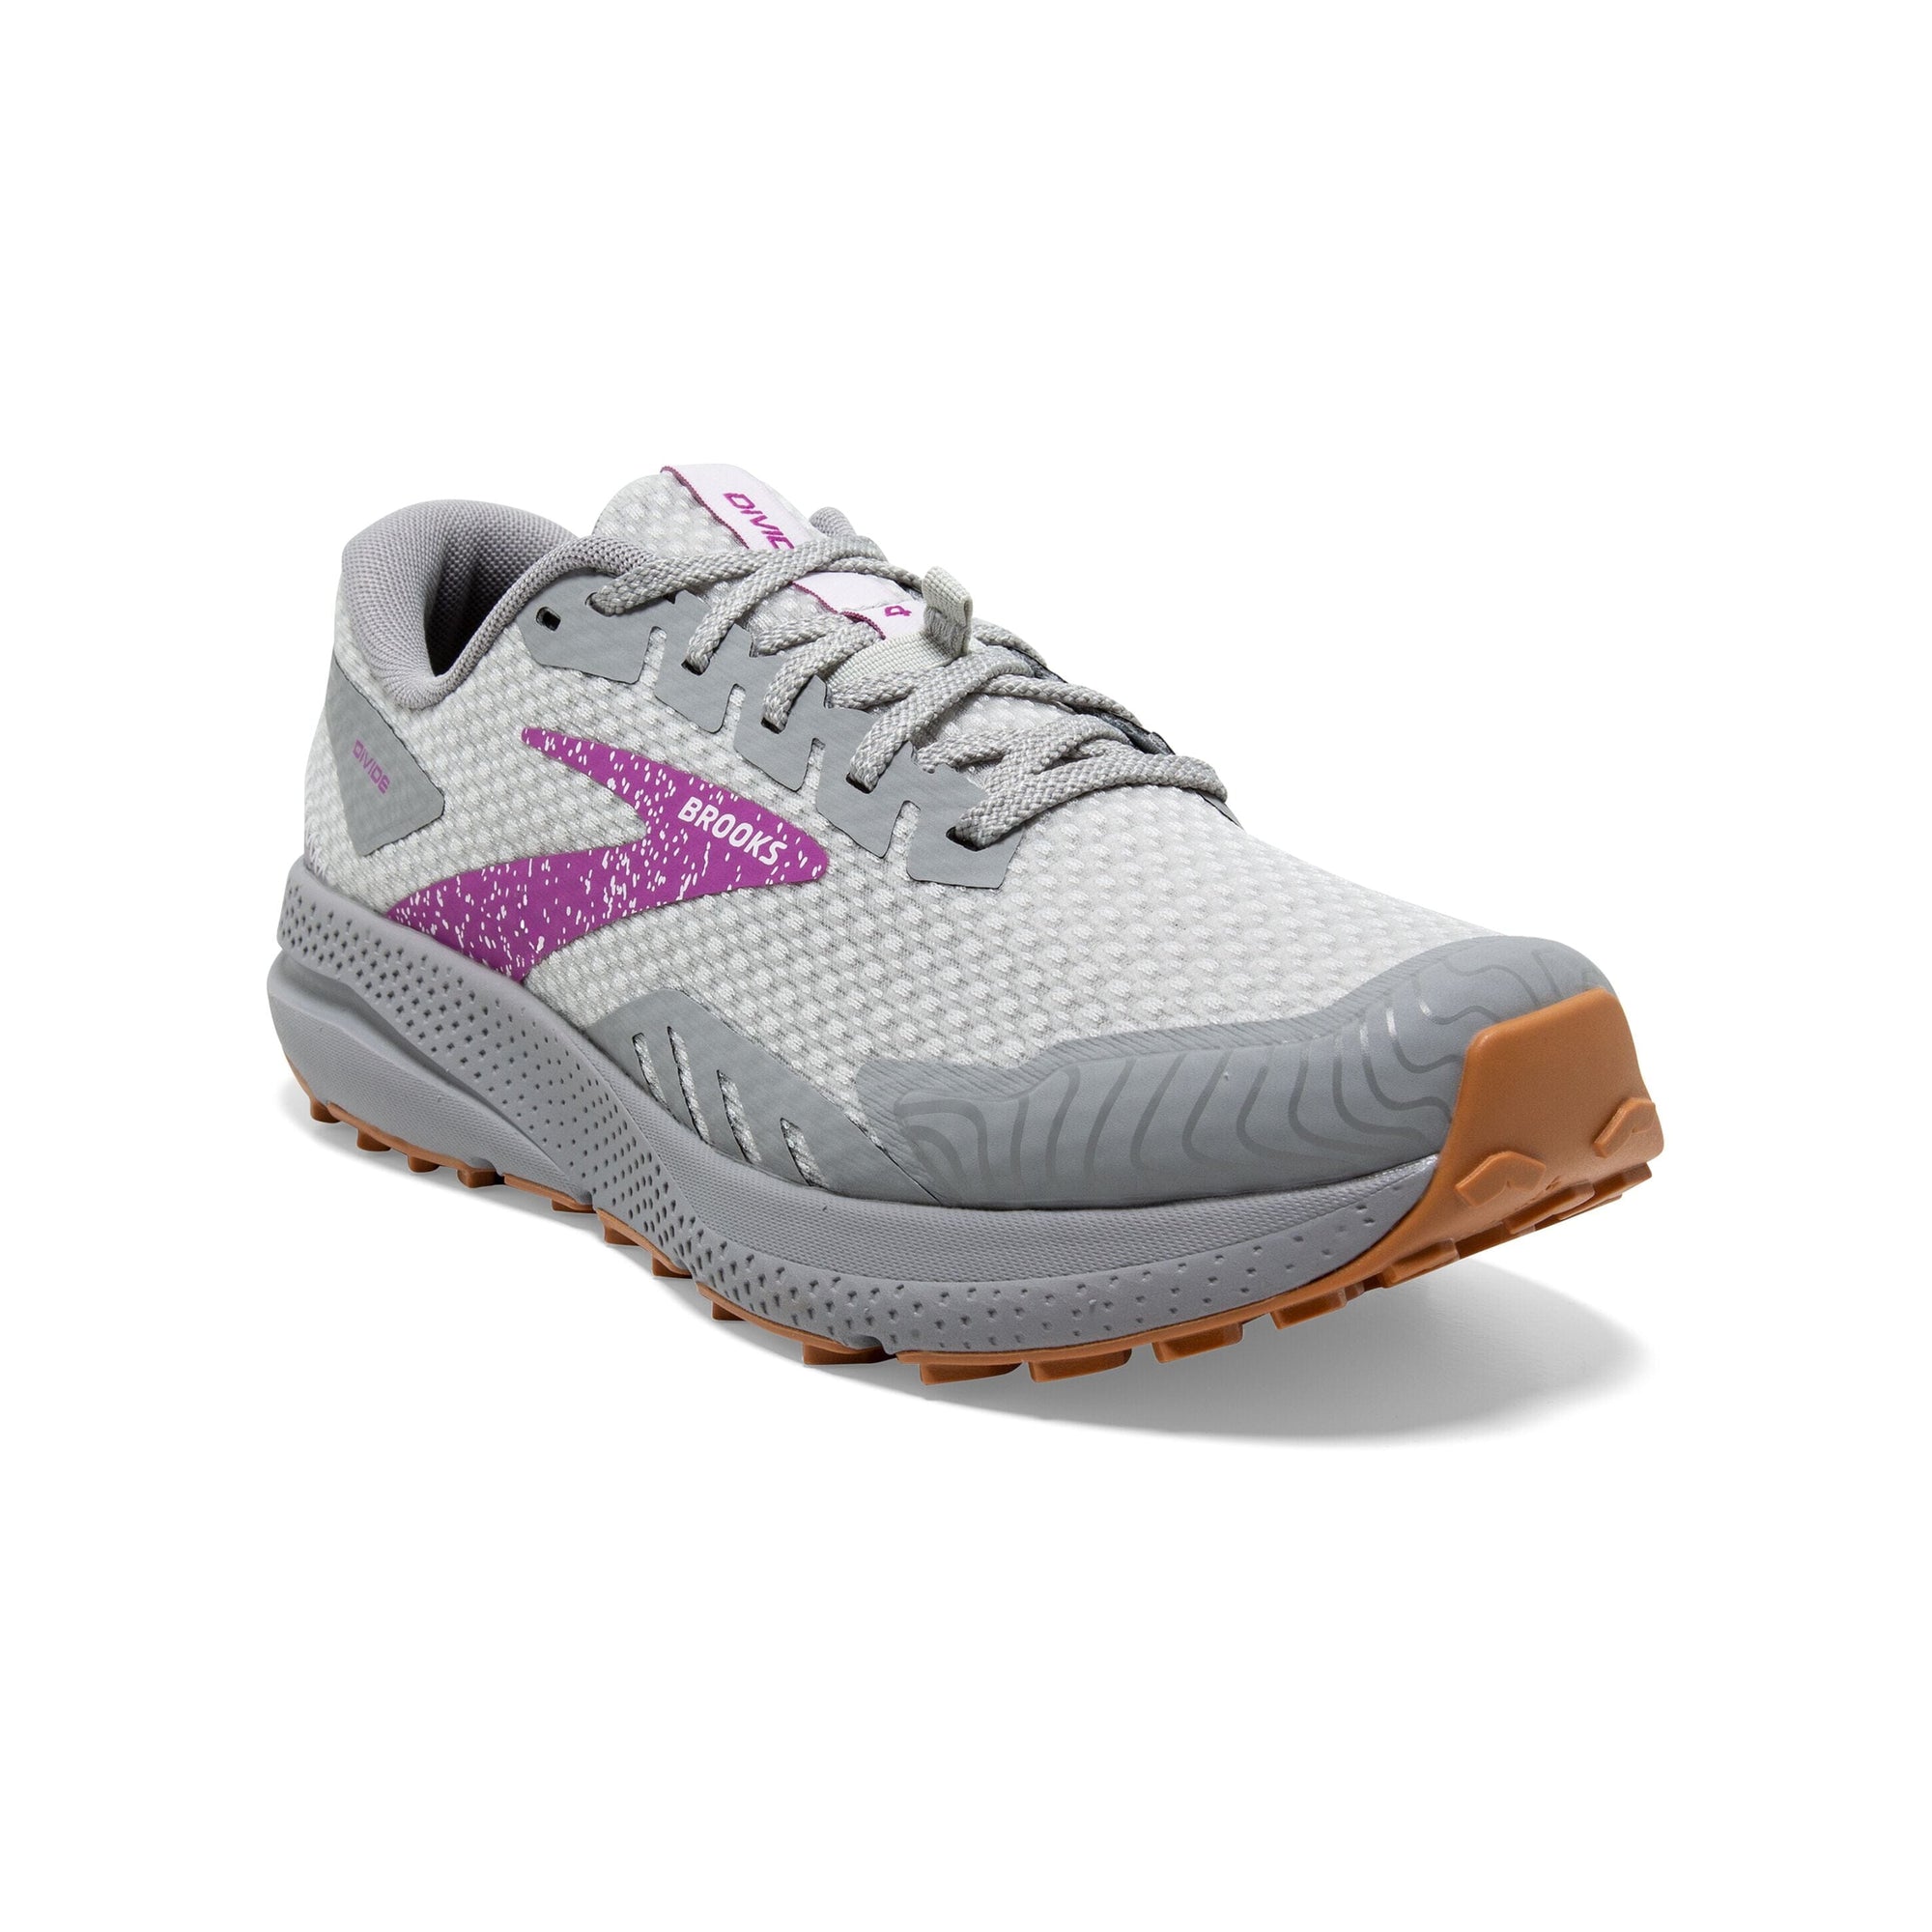 Brooks Women's Divide 4 Trail Running Shoes Alloy/Oyster/Violet US 6.5 